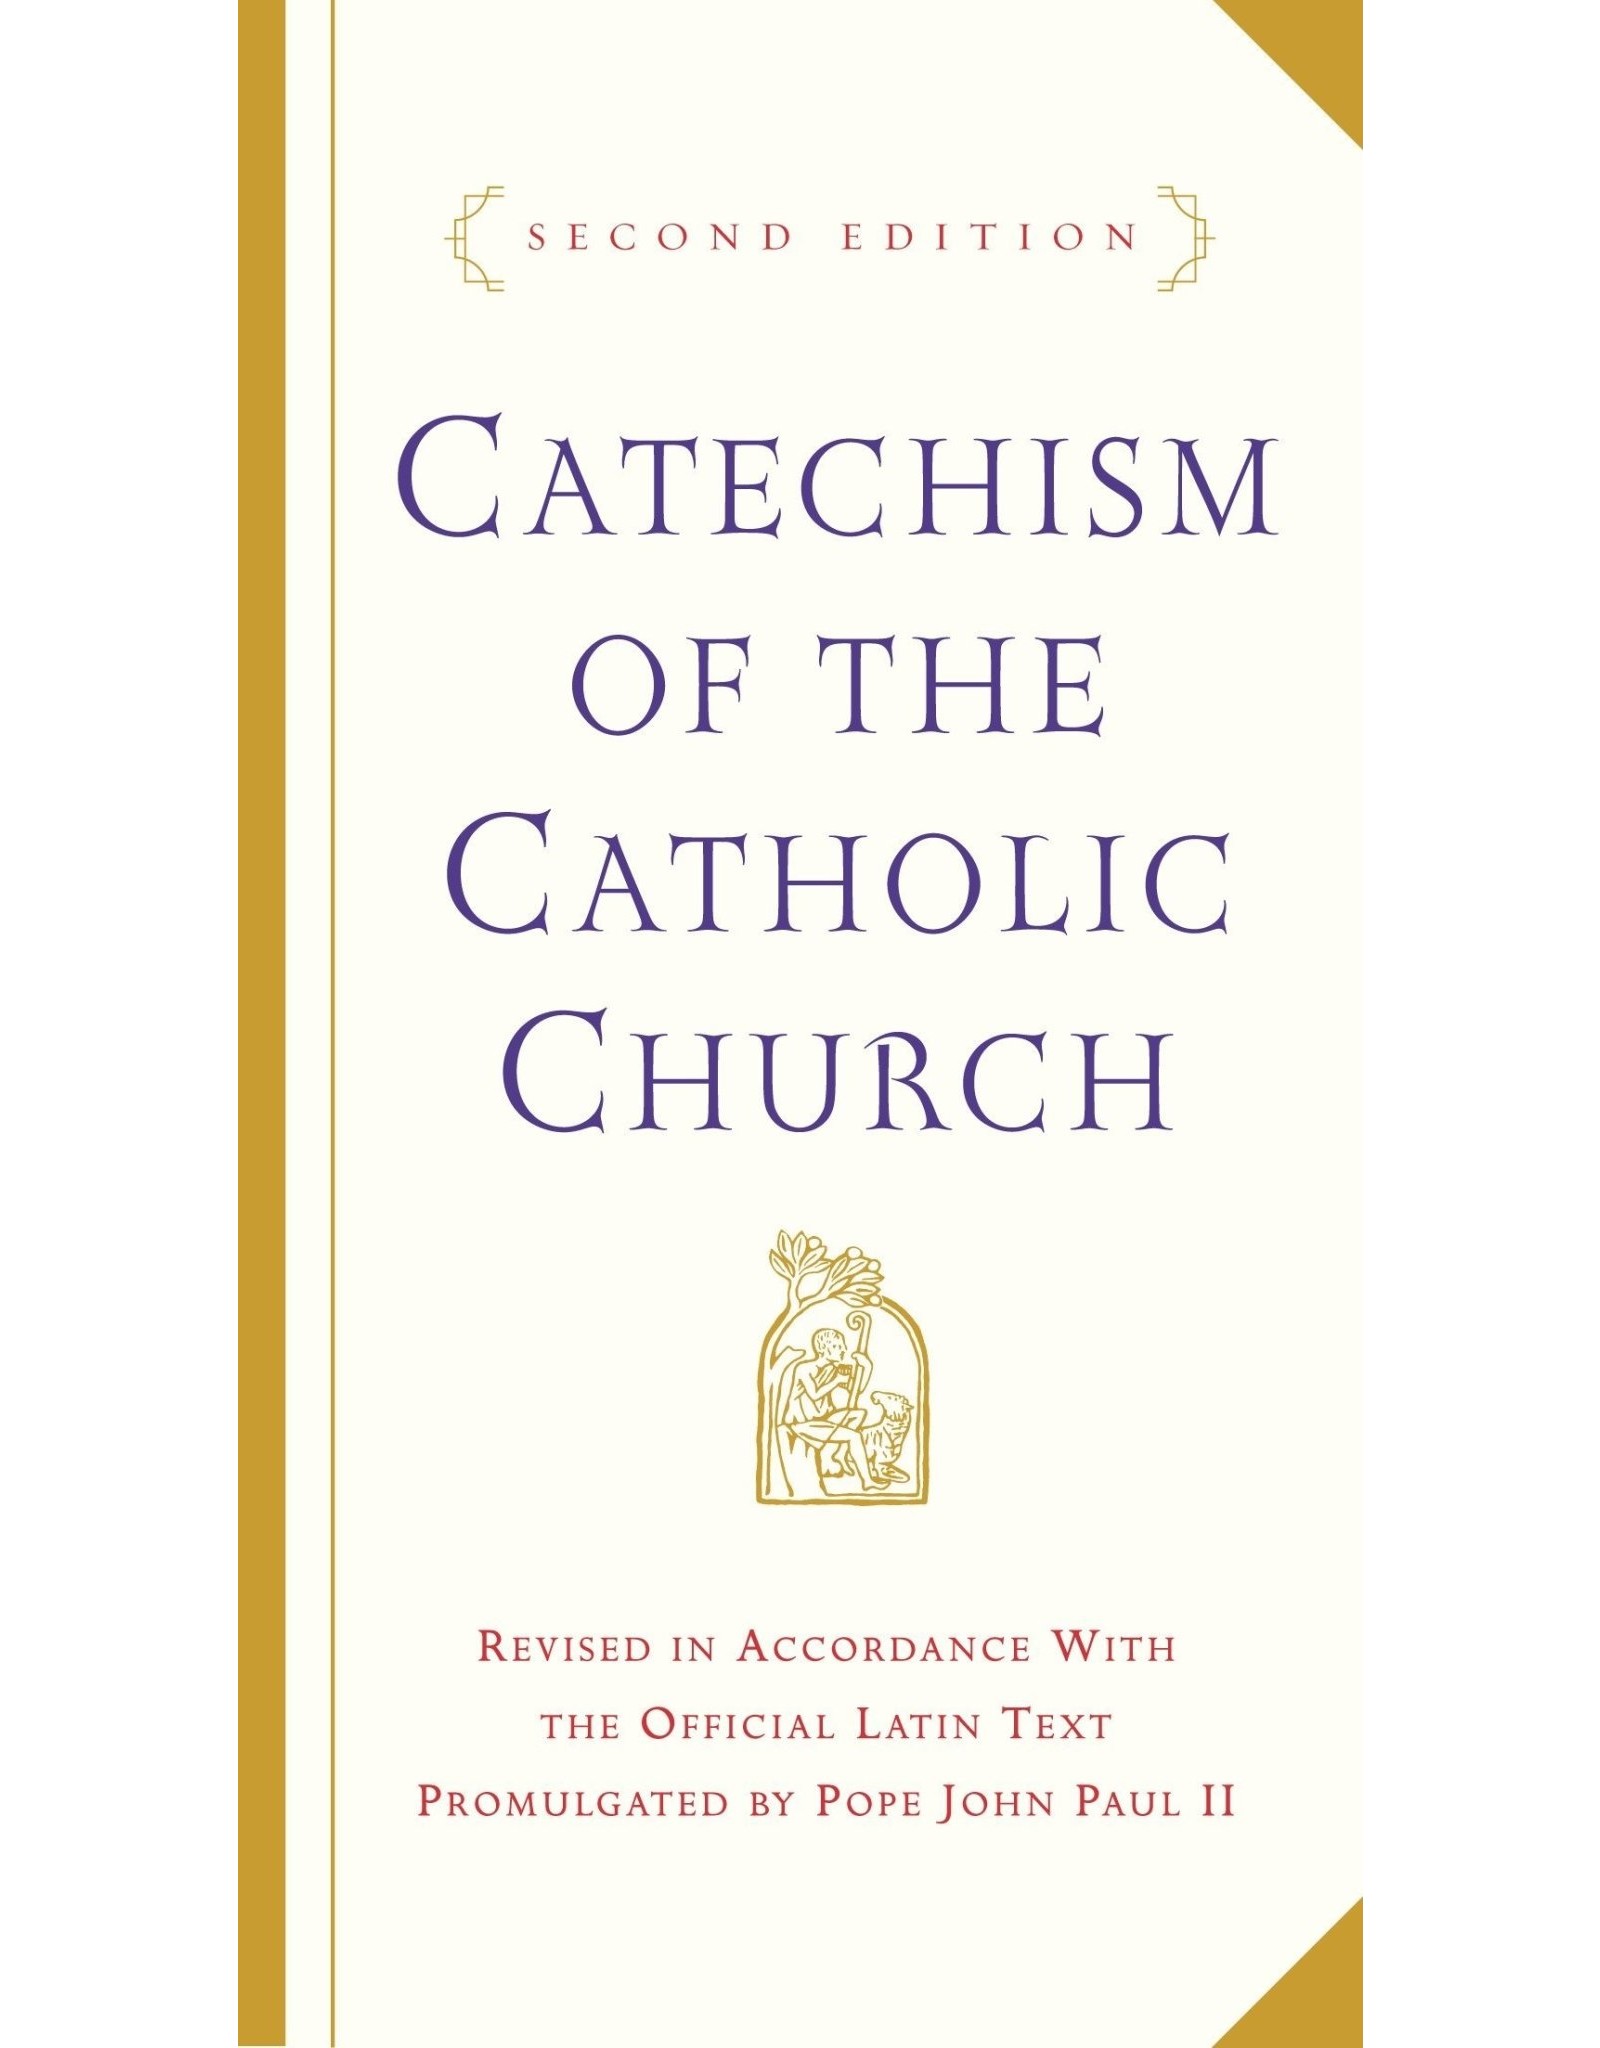 Double Day Catechism of the Catholic Church (Small White Hardcover)